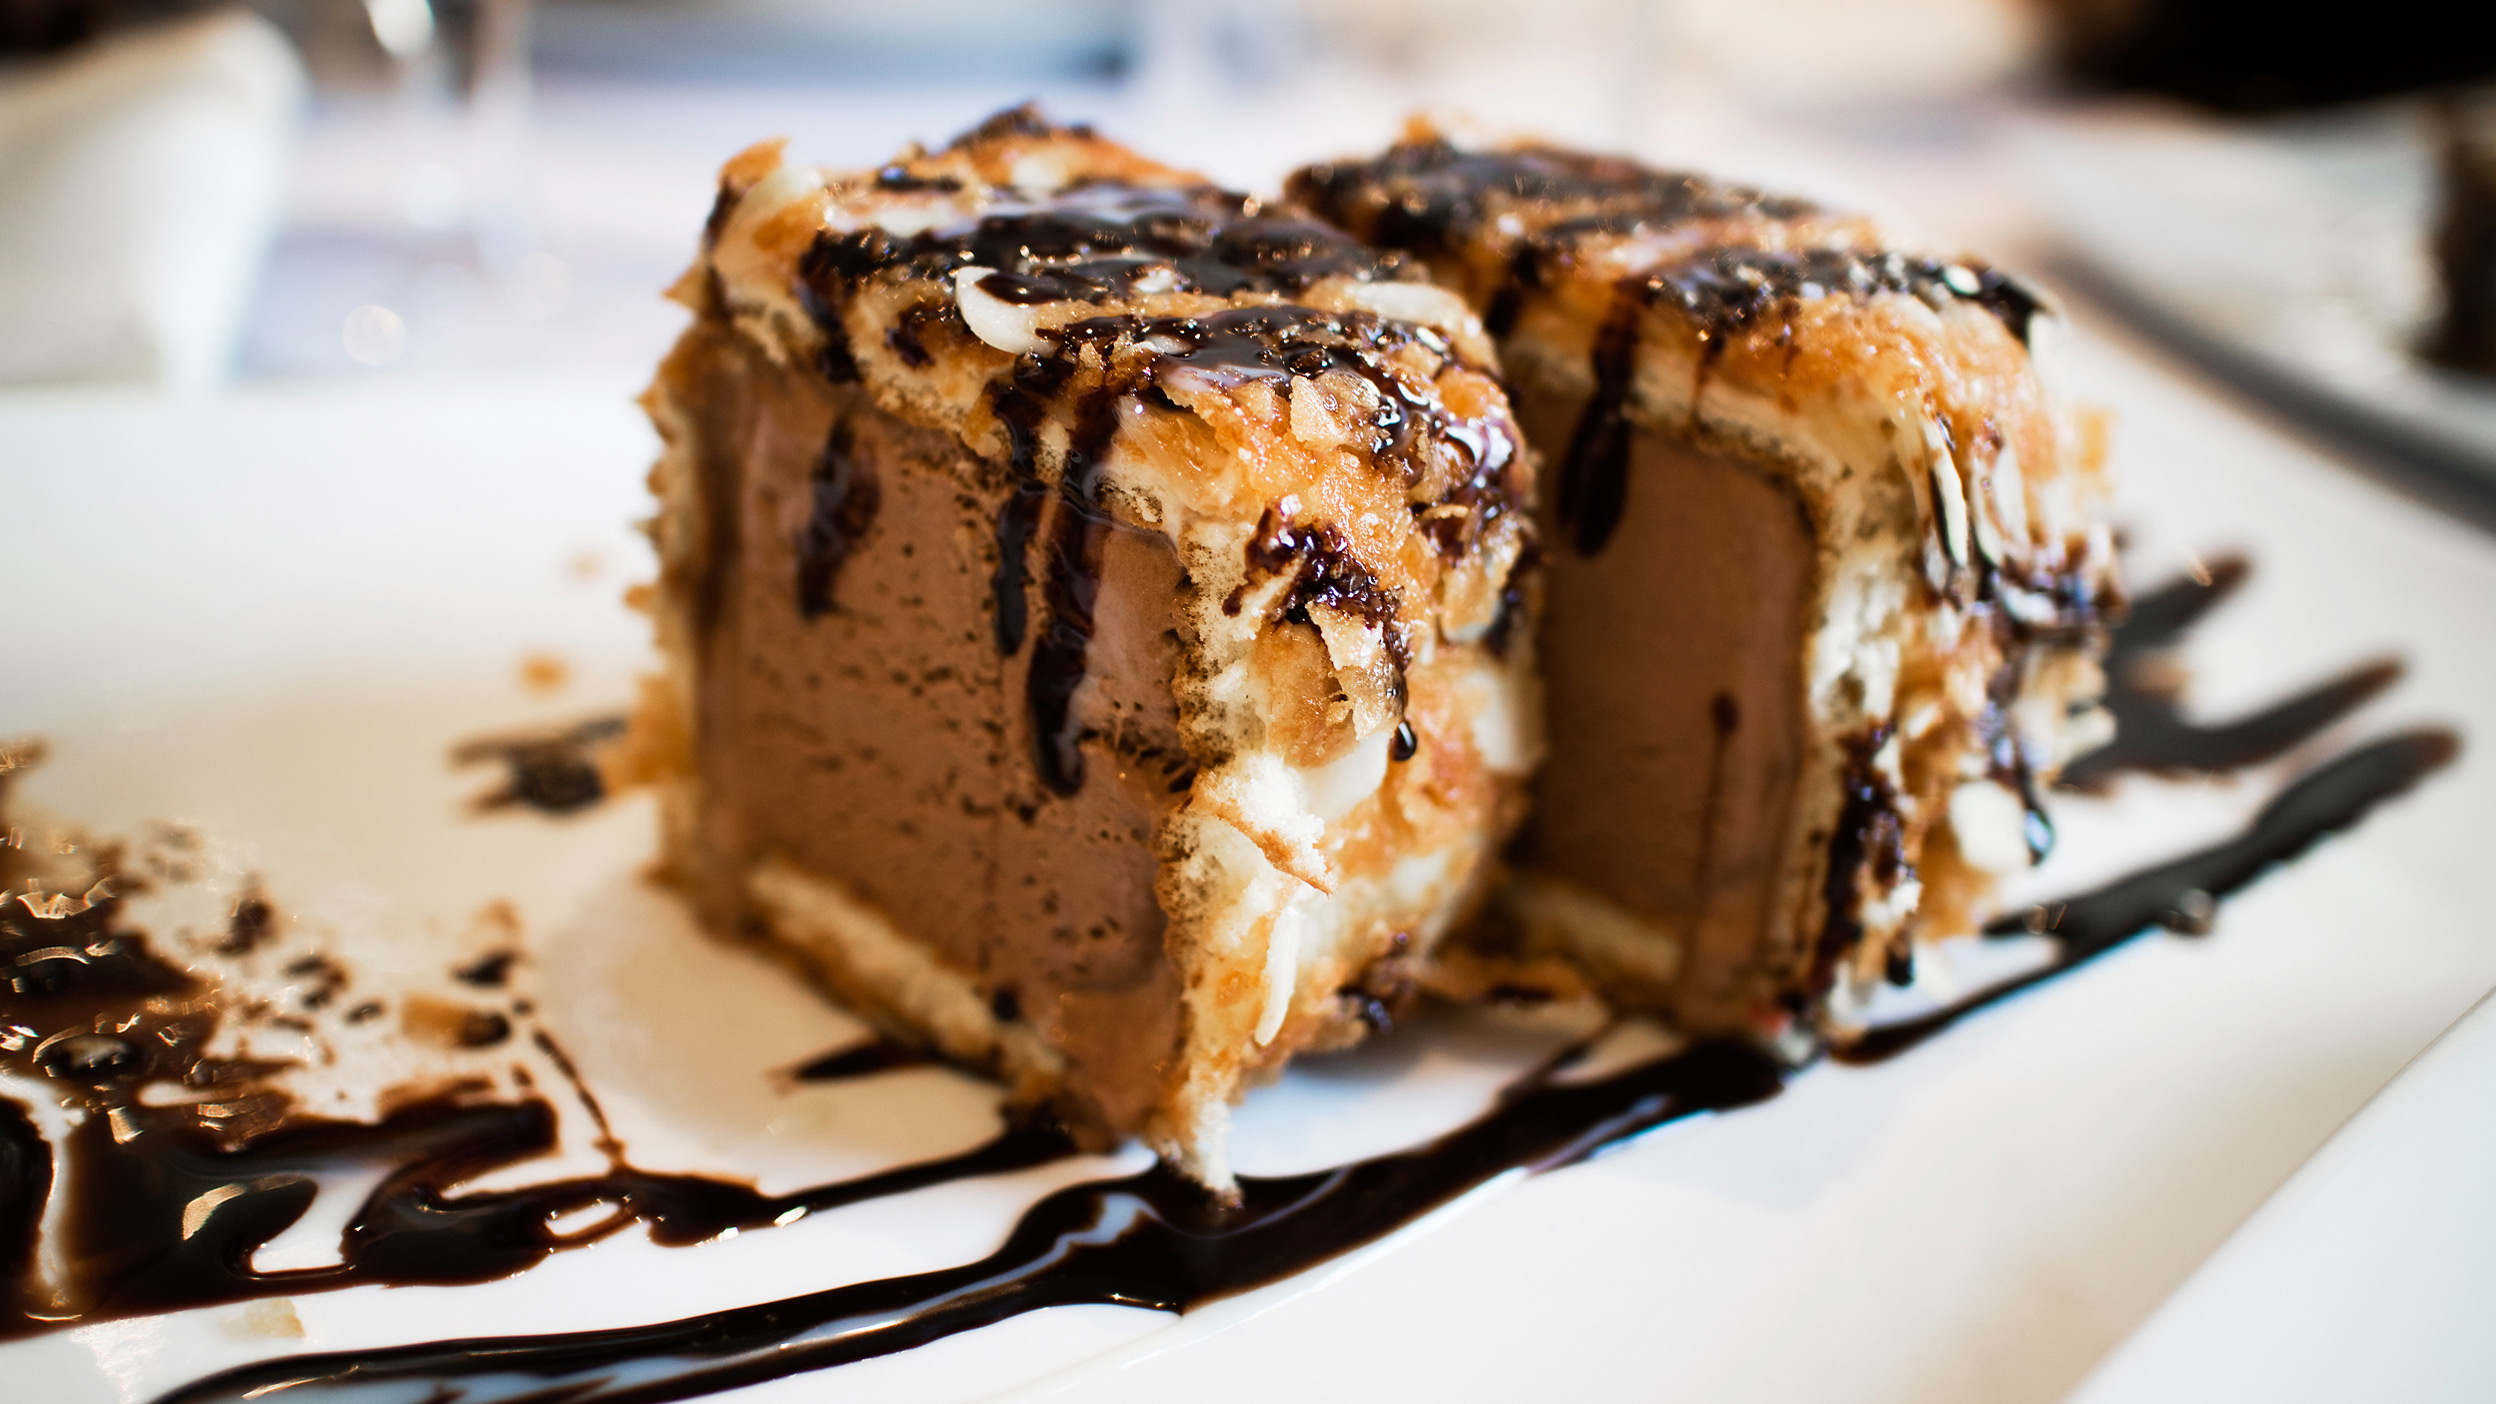 Deep fried ice cream on a plate drizzled in chocolate sauce